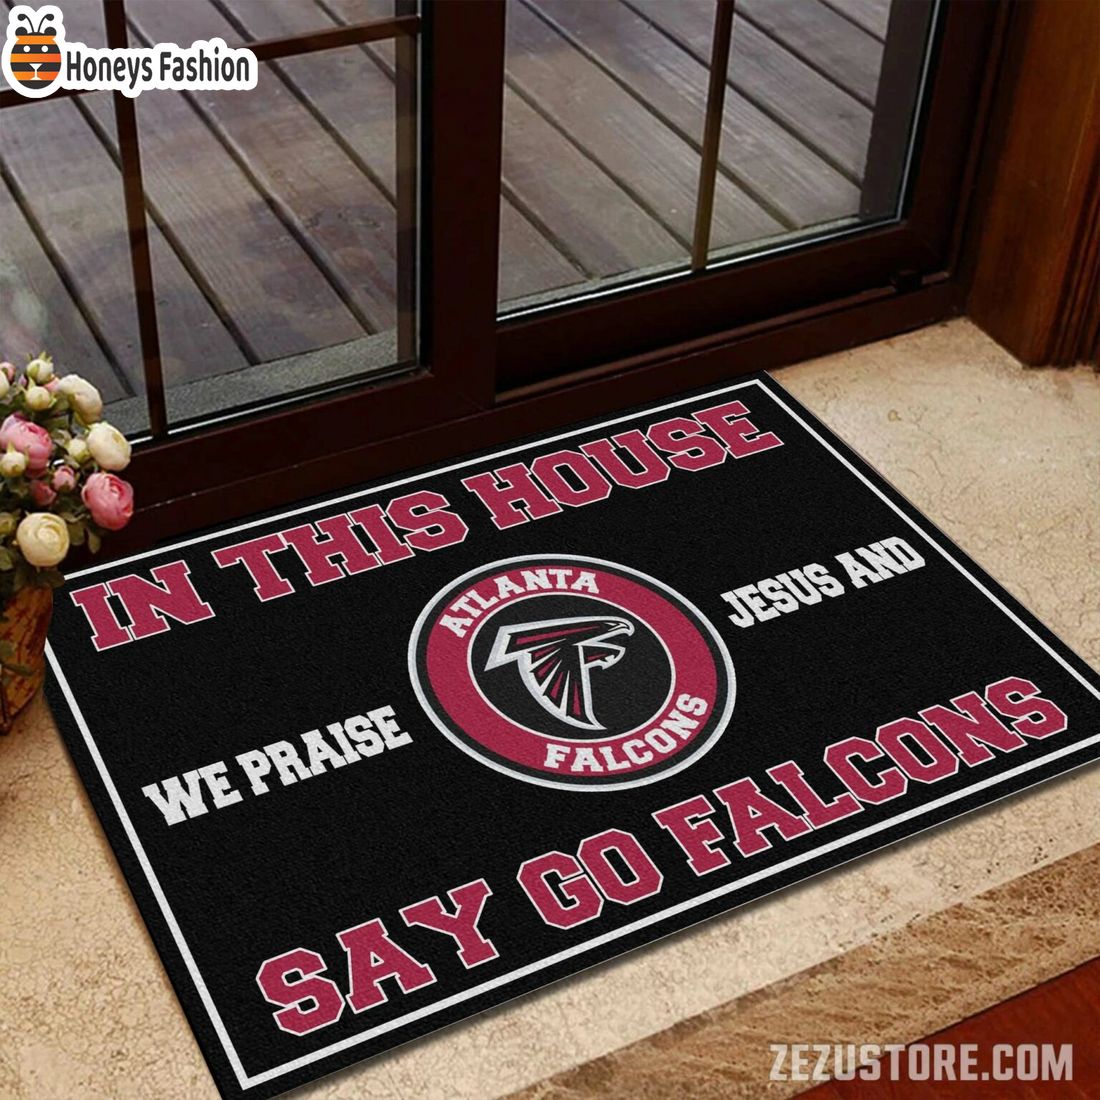 In this house we praise jesus and say go Falcons doormat